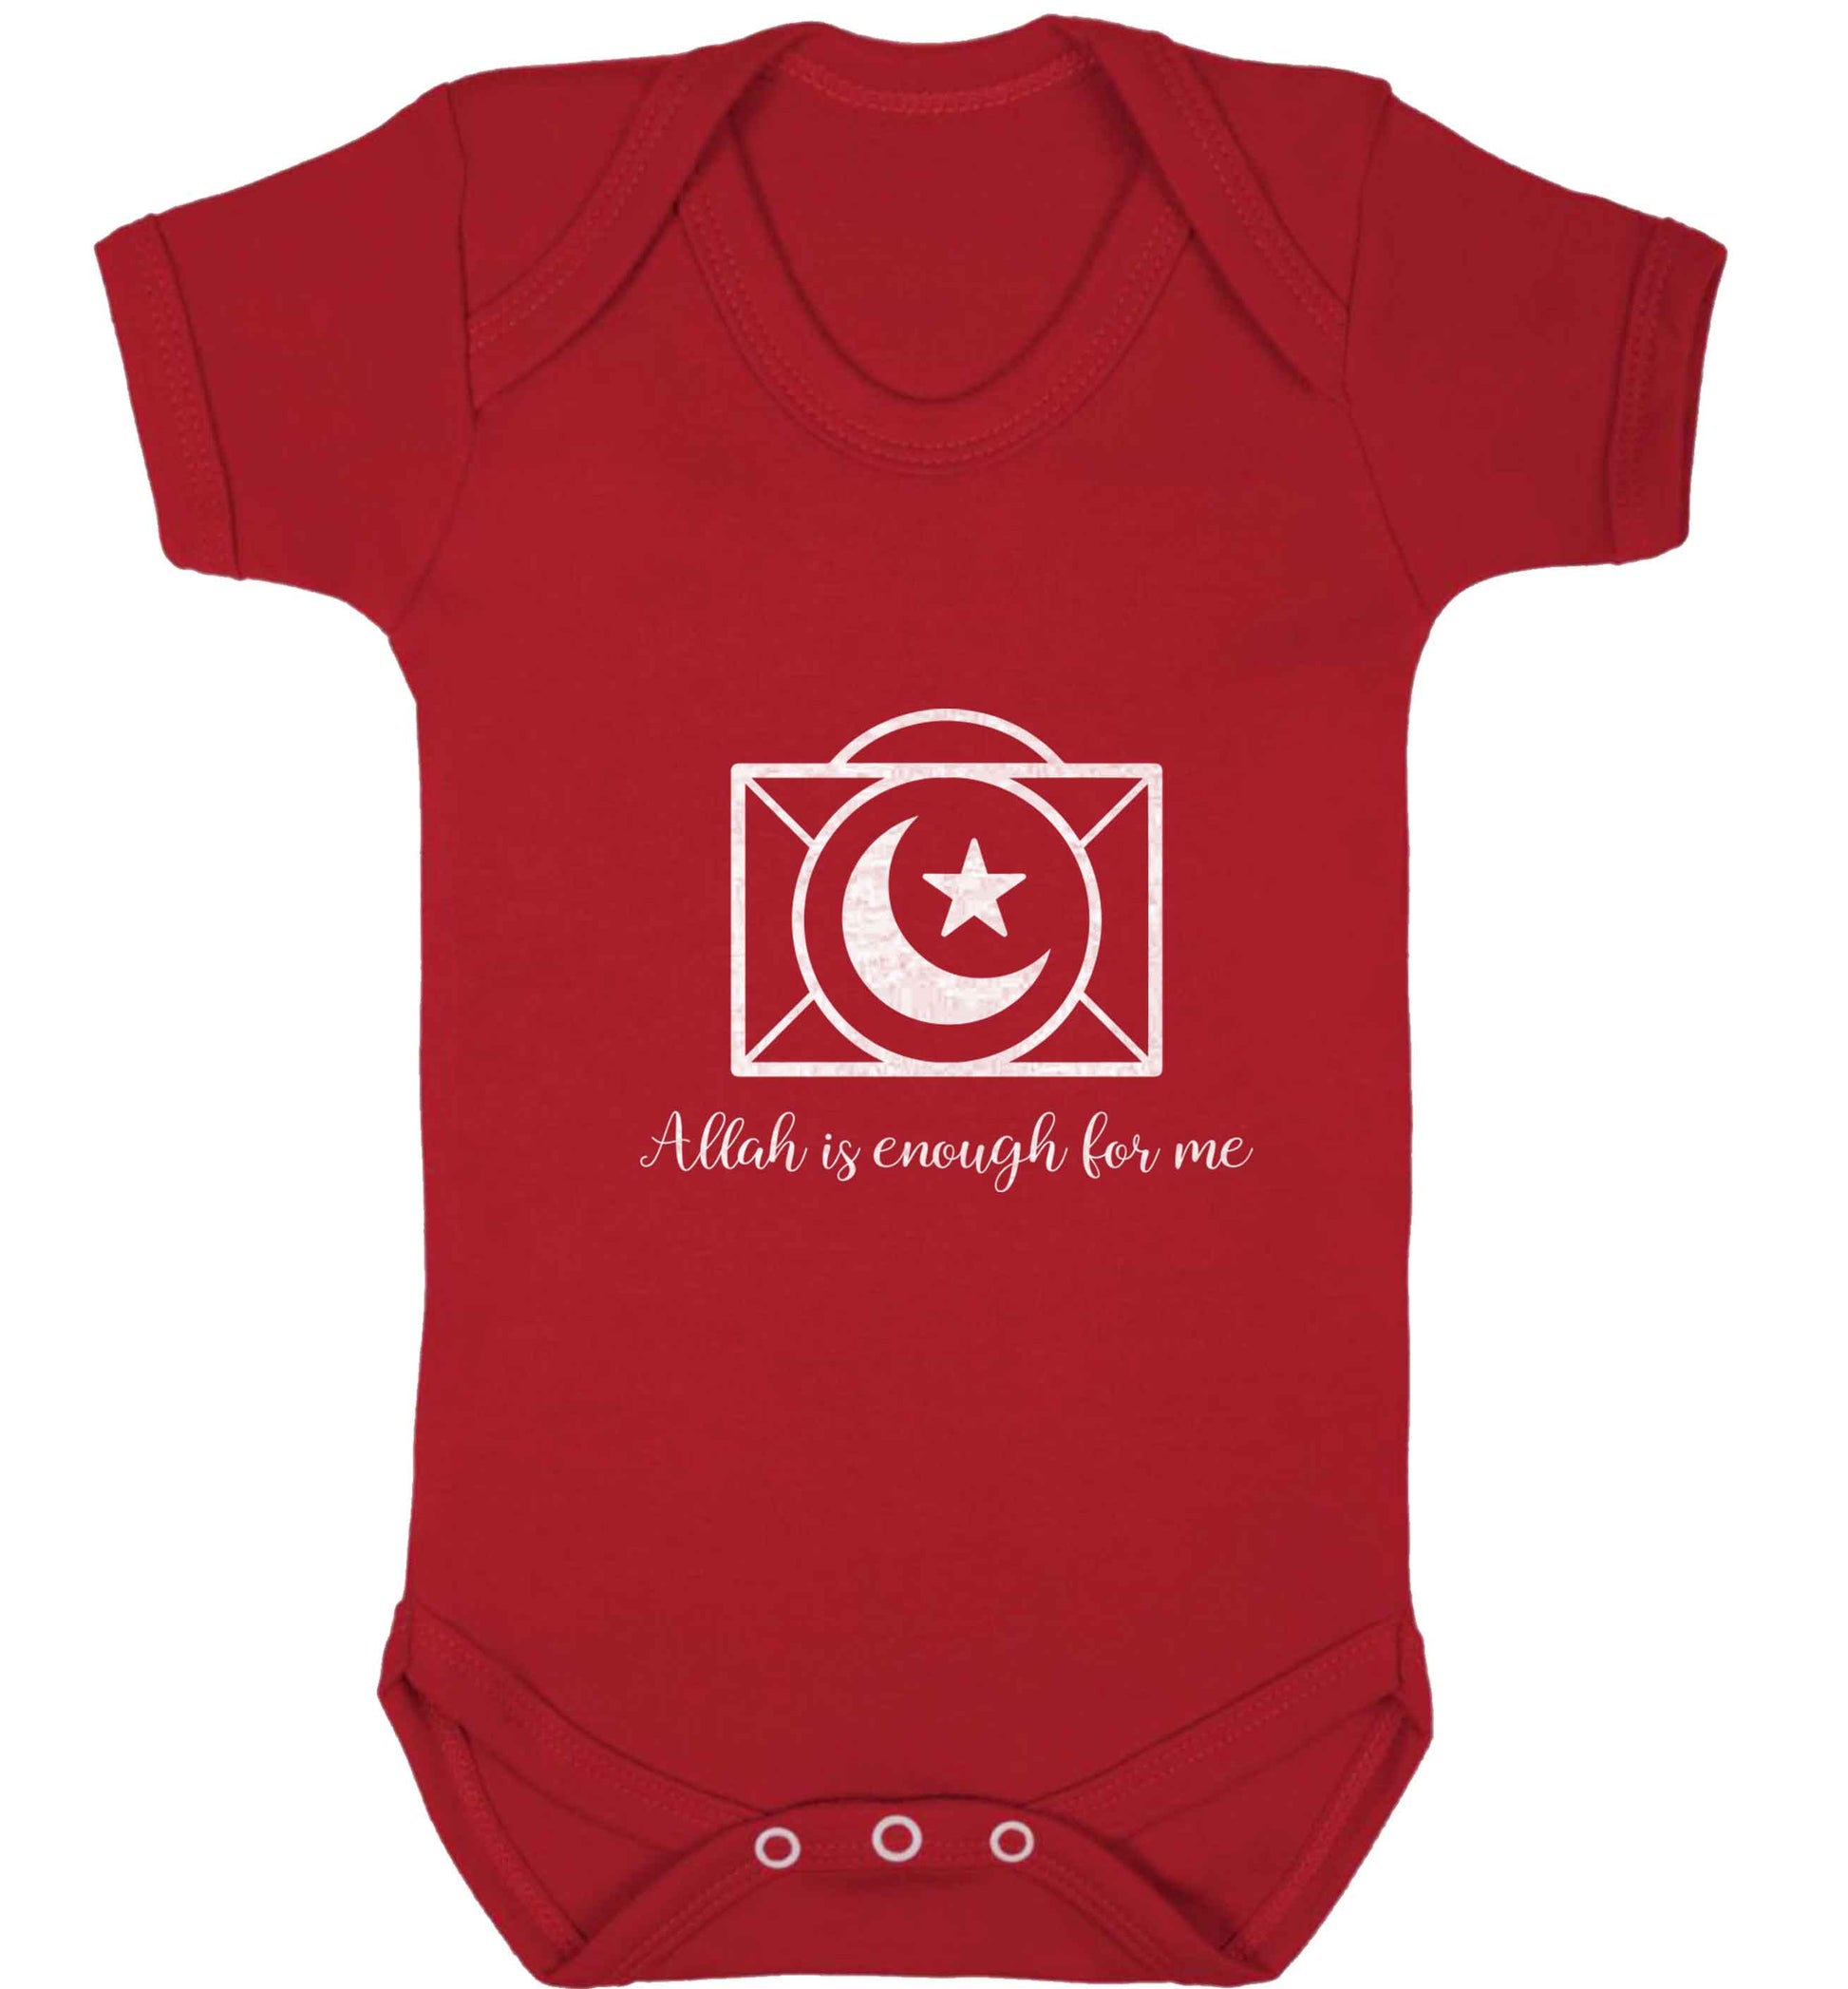 Allah is enough for me baby vest red 18-24 months